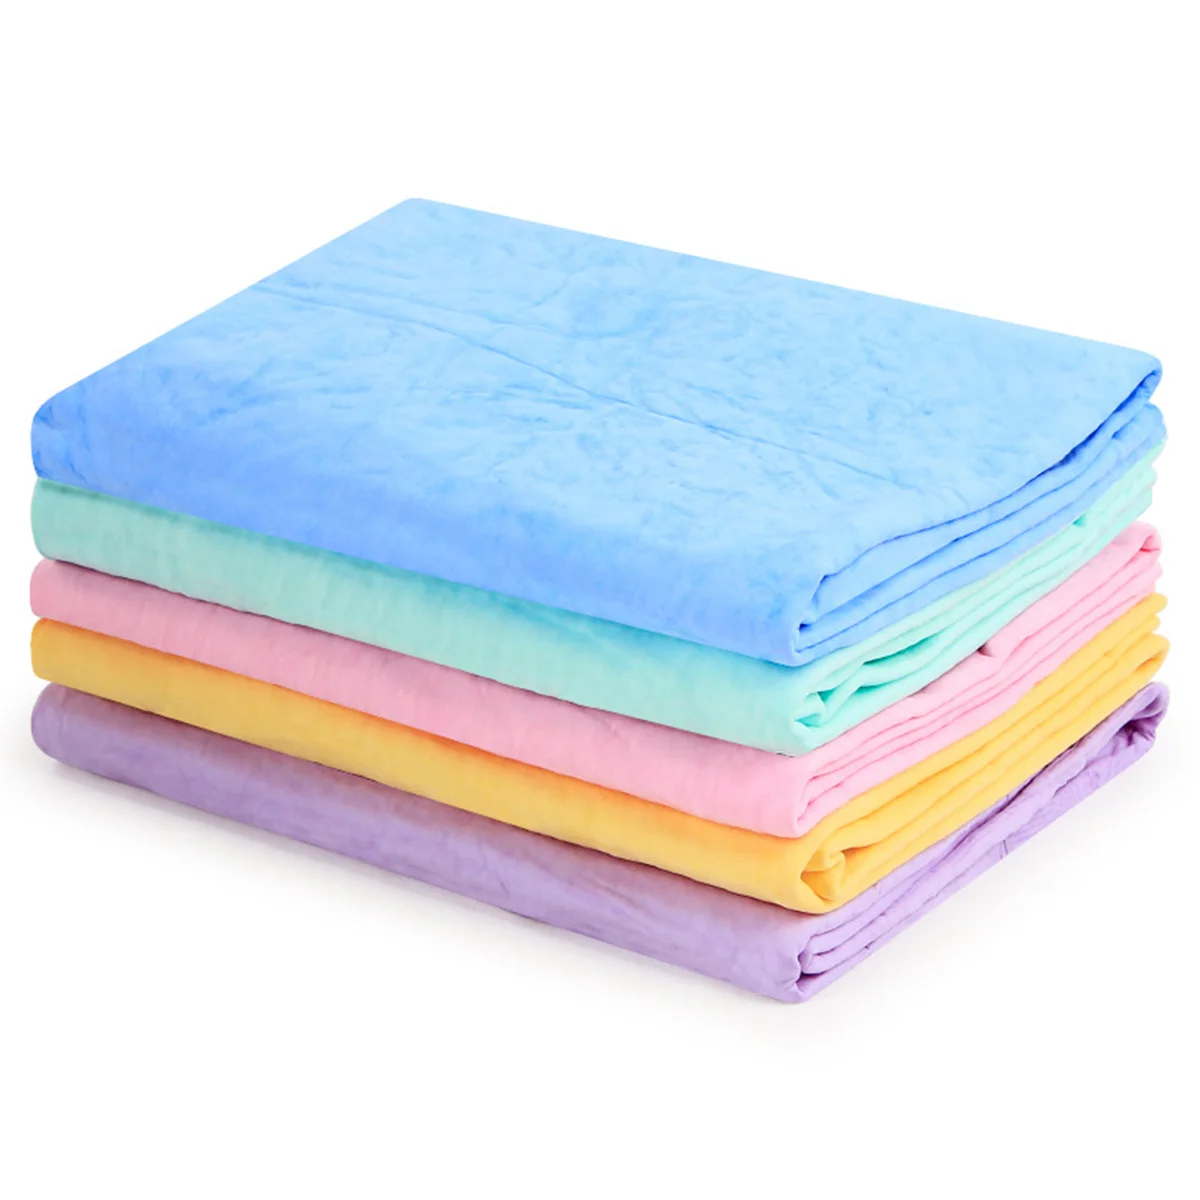 

PVA Functional Towel Synthetic Absorbent Deerskin Cloth Towels for Cleaning Bathroom Wet Hair Car Wash Home